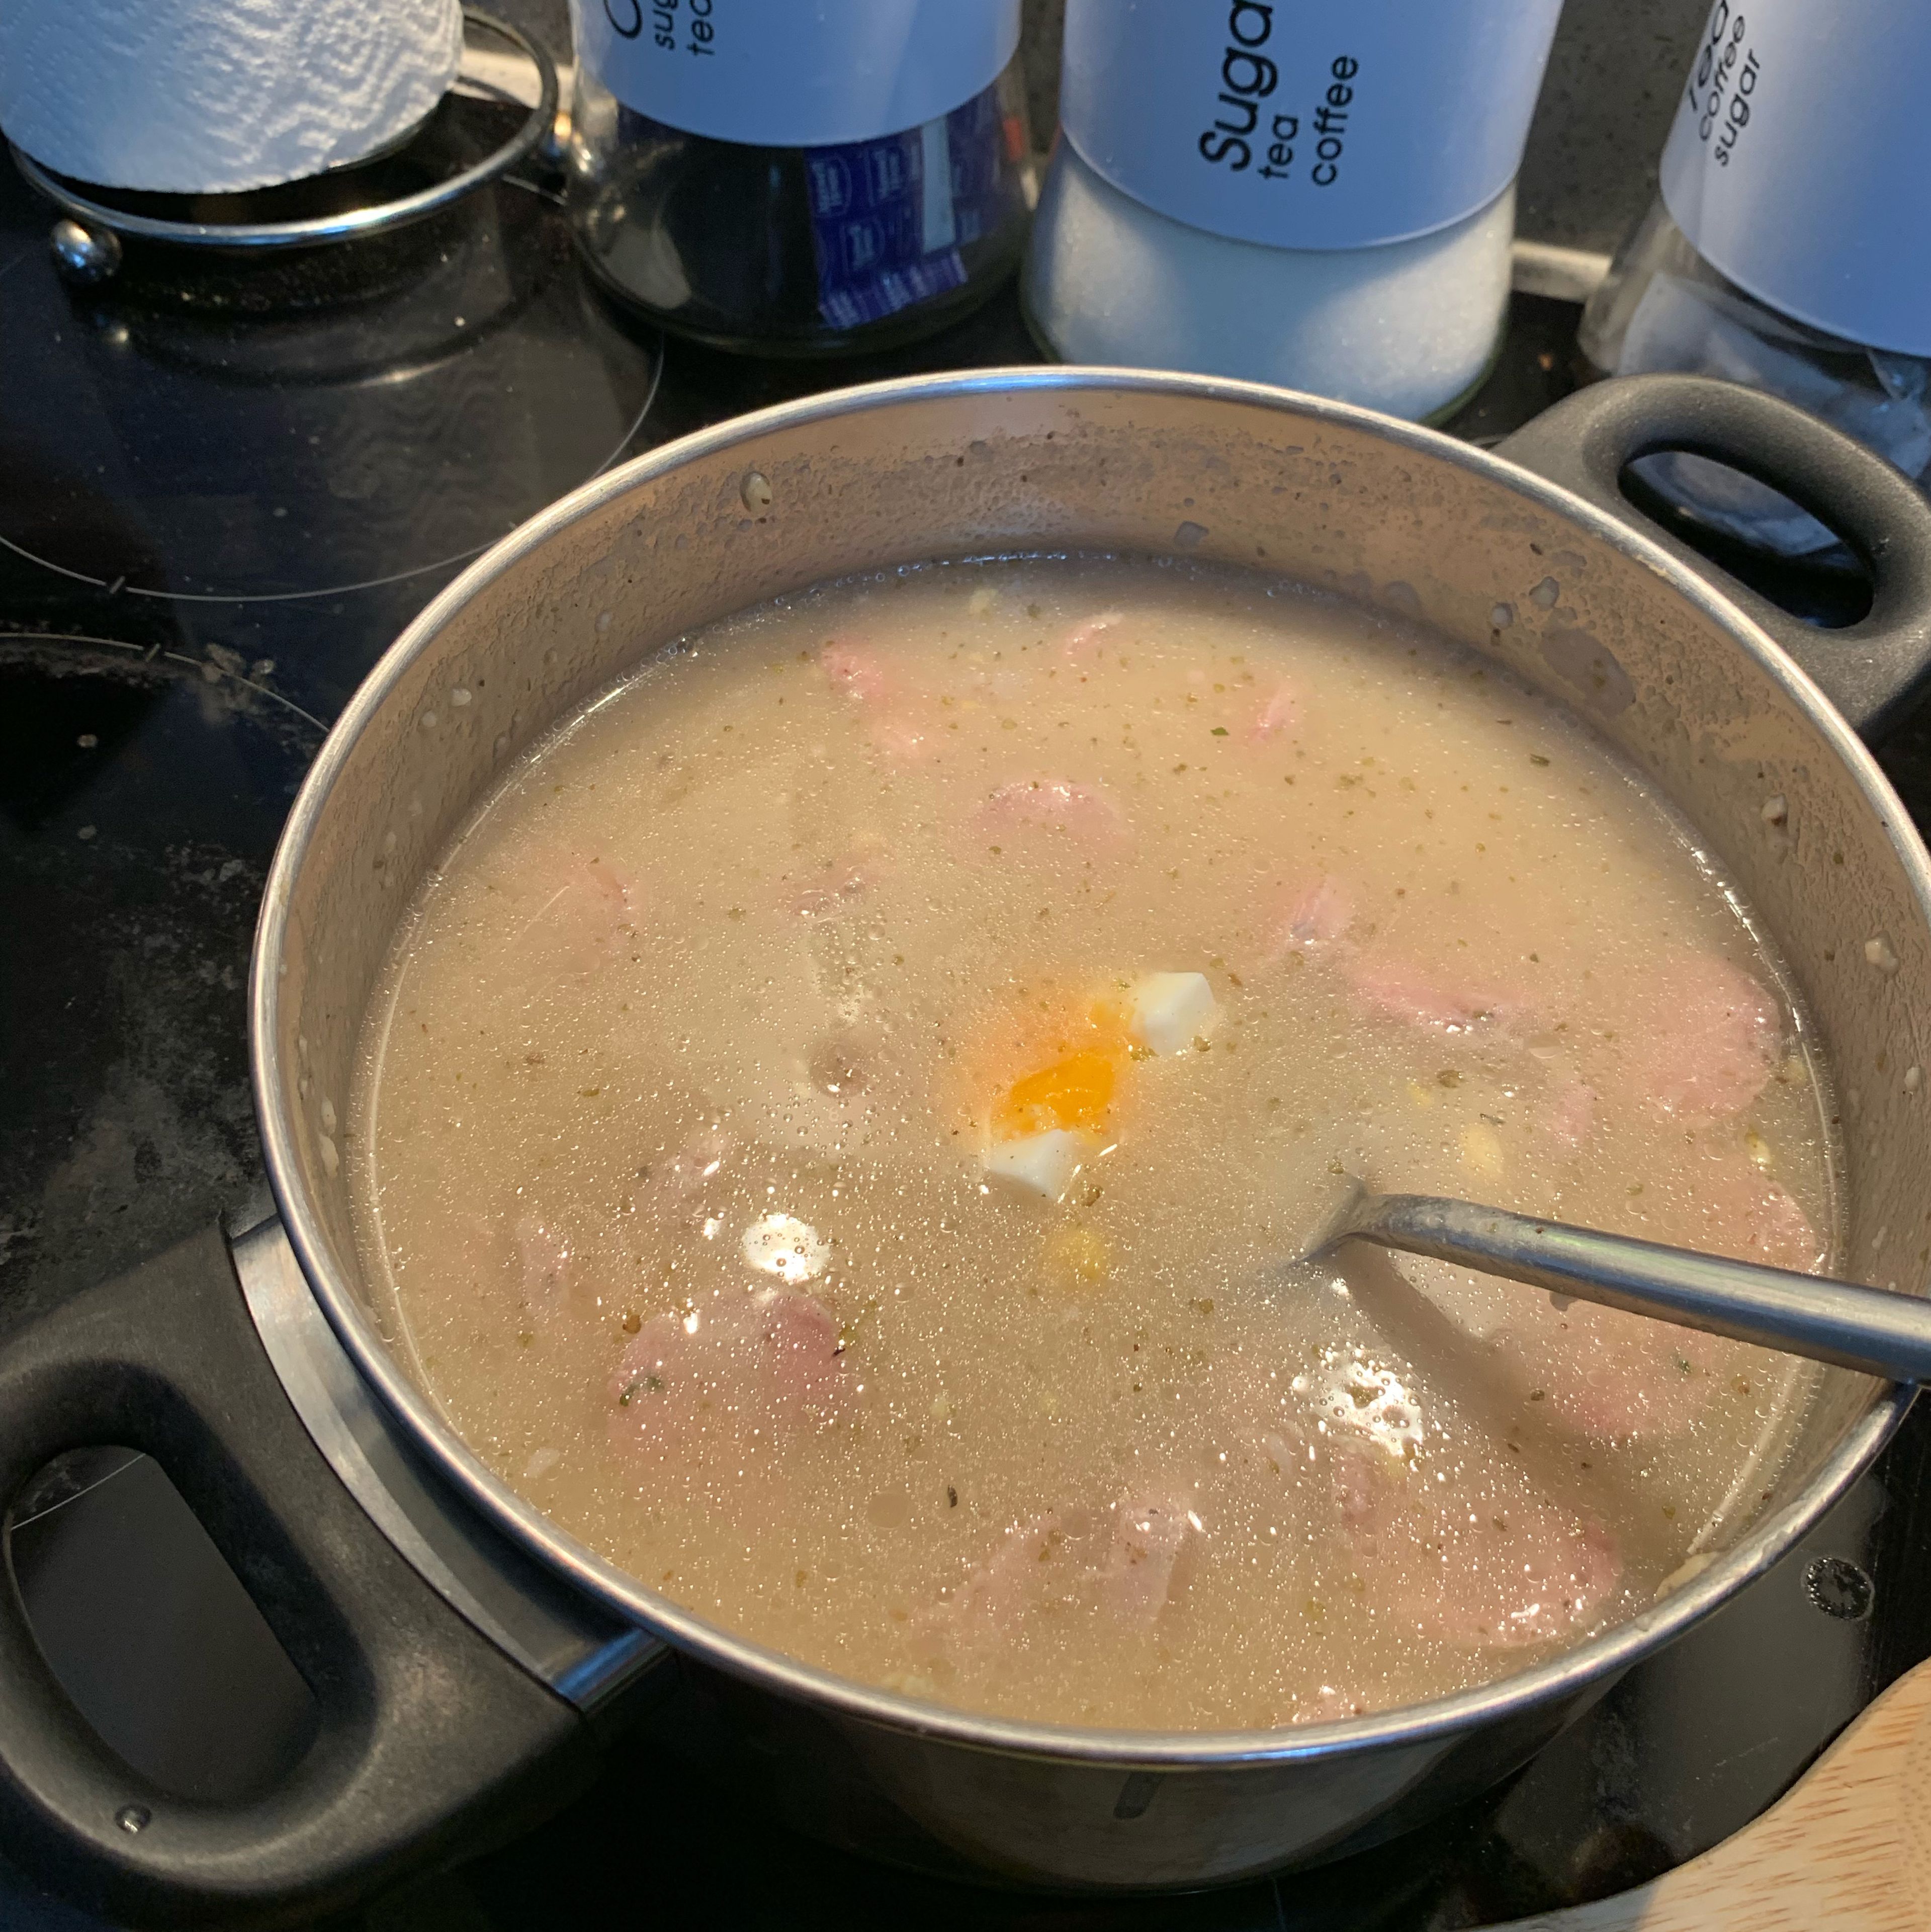 Cut the previously hard boiled eggs into halves or quarters and add to the soup.